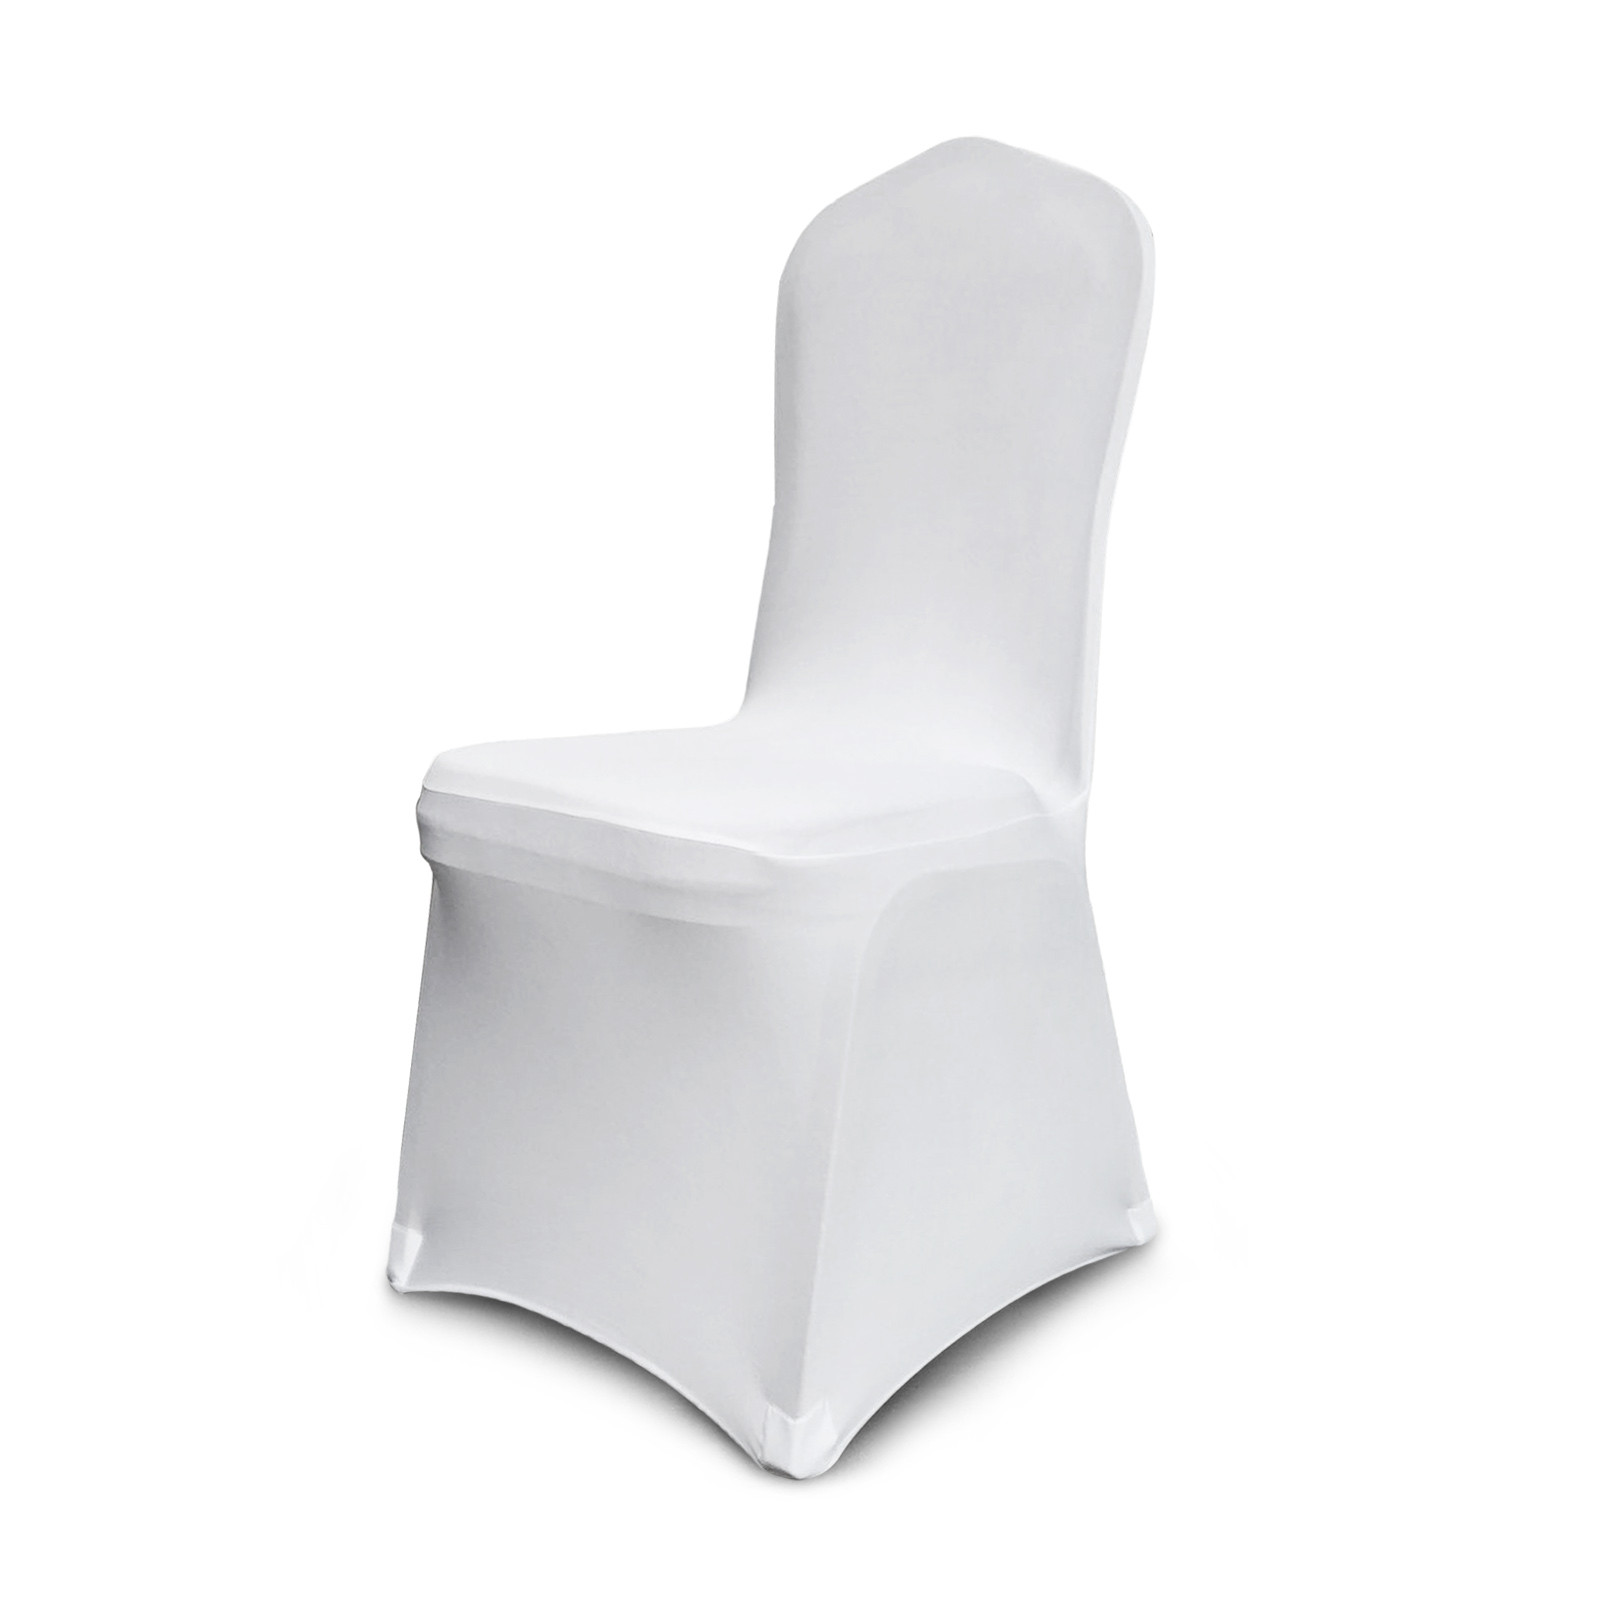 50PCS Spandex Chair Covers Wedding Party Décor Soild Color Smoothly Black NEW 